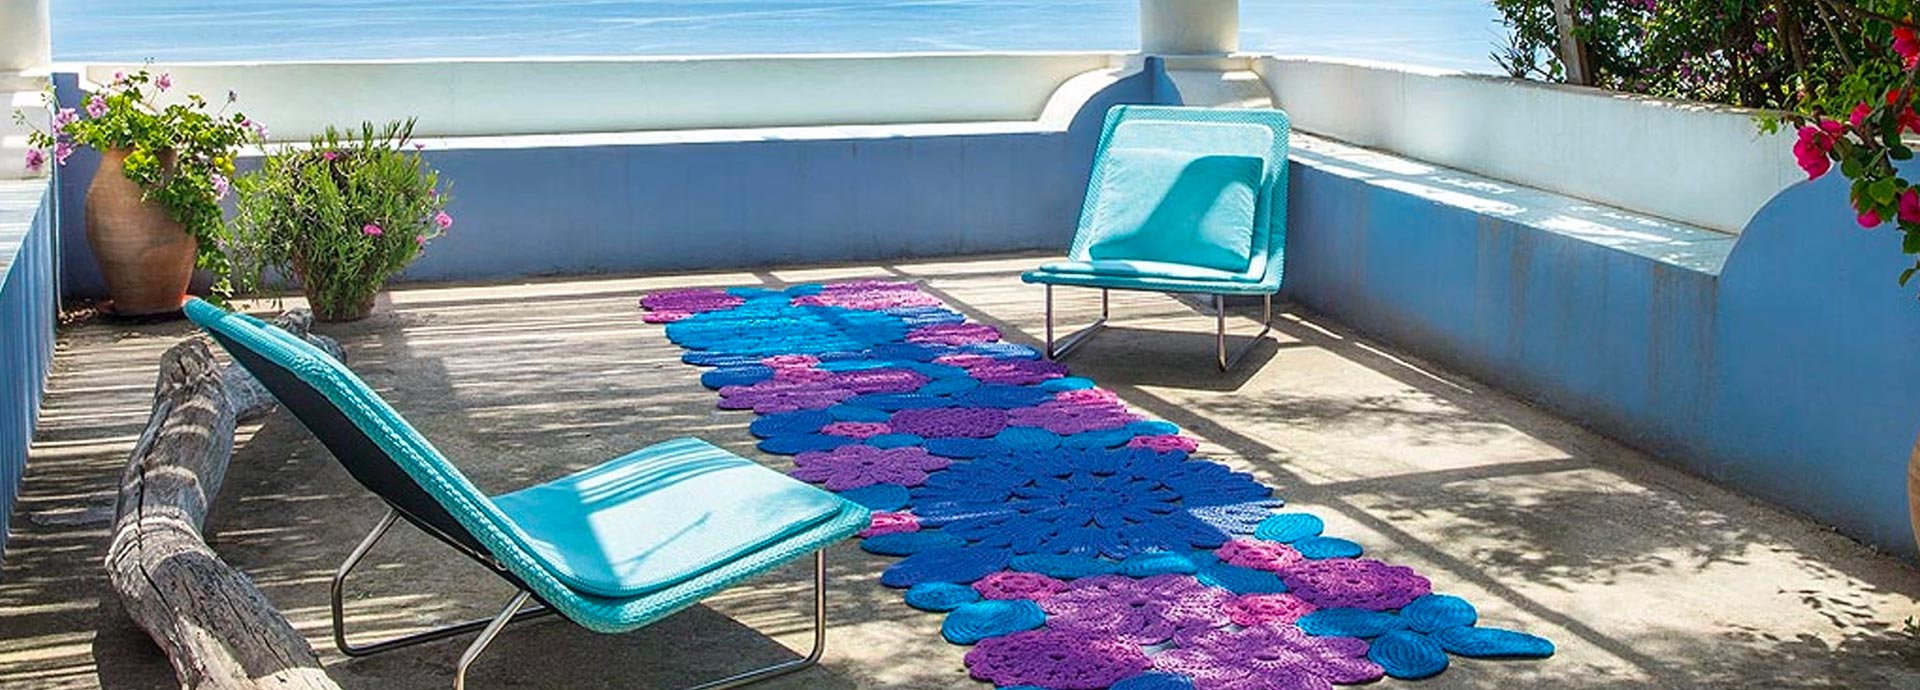 Sand Paola Lenti collection